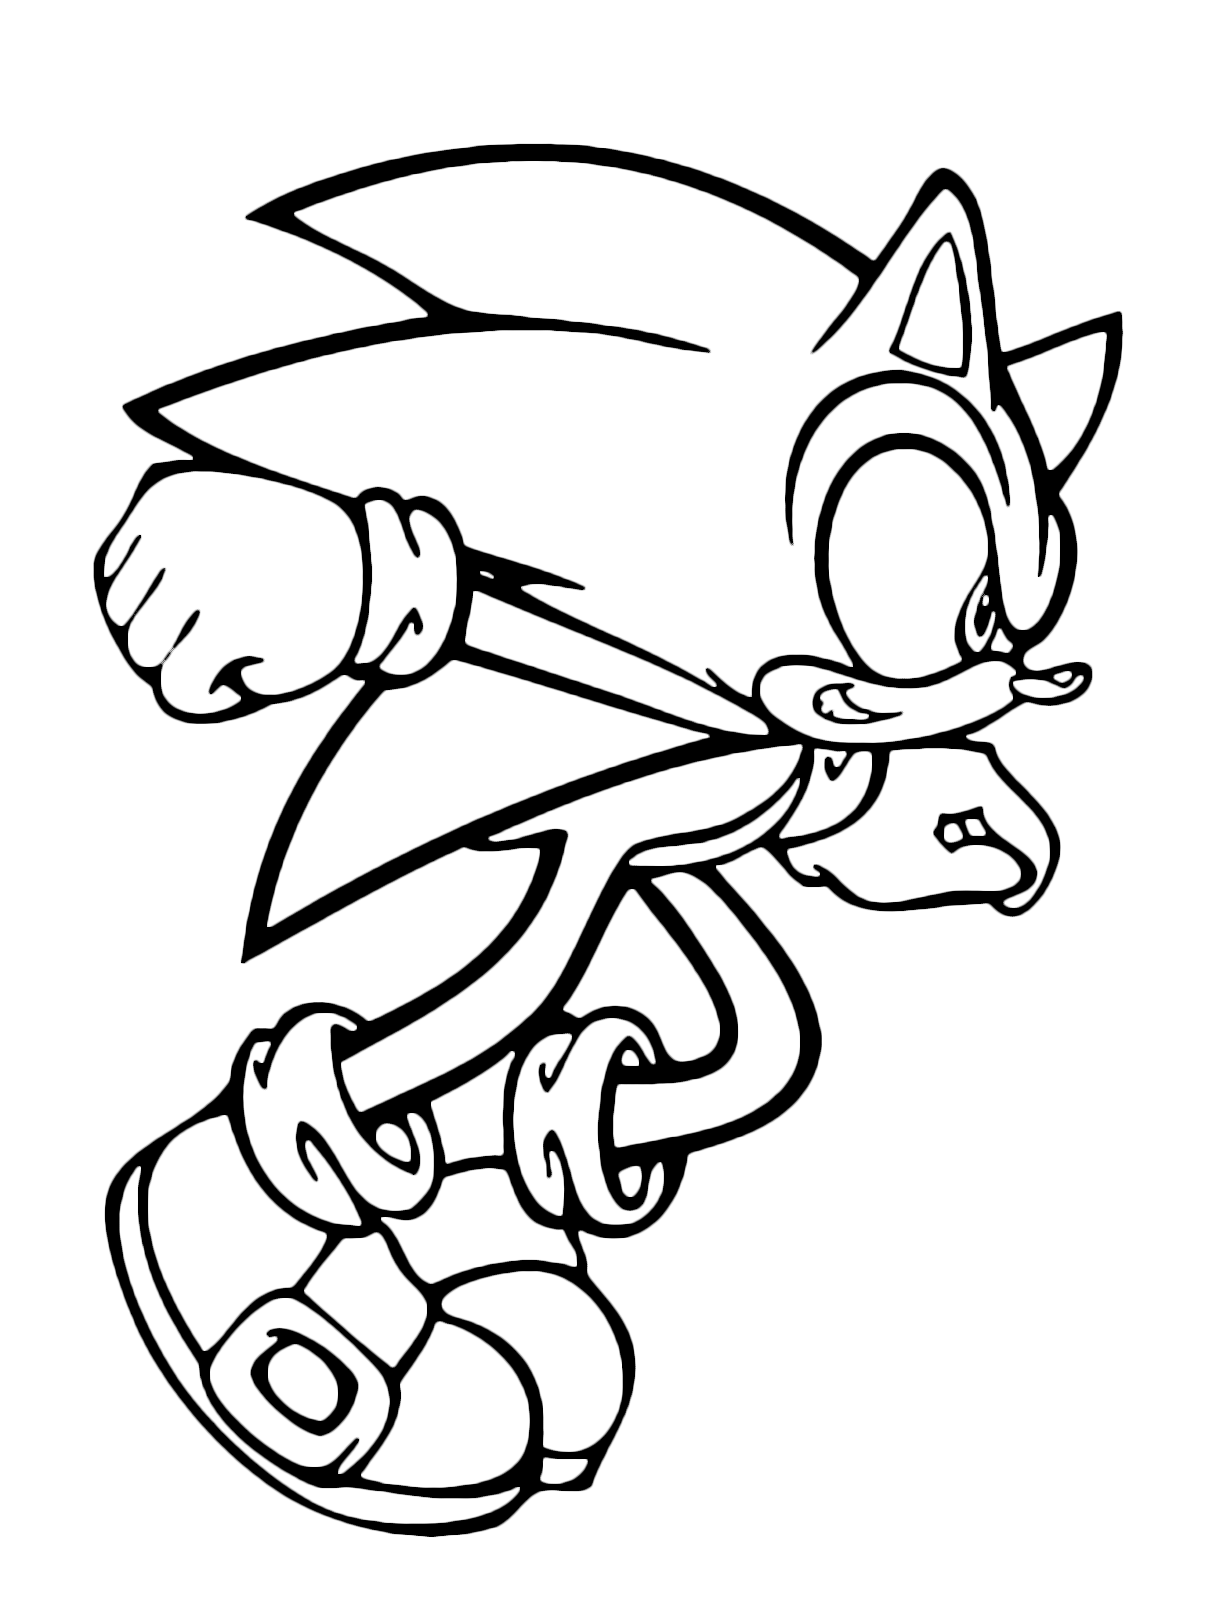 Sonic Boom - Sonic Boom is ready to release his supersonic speed